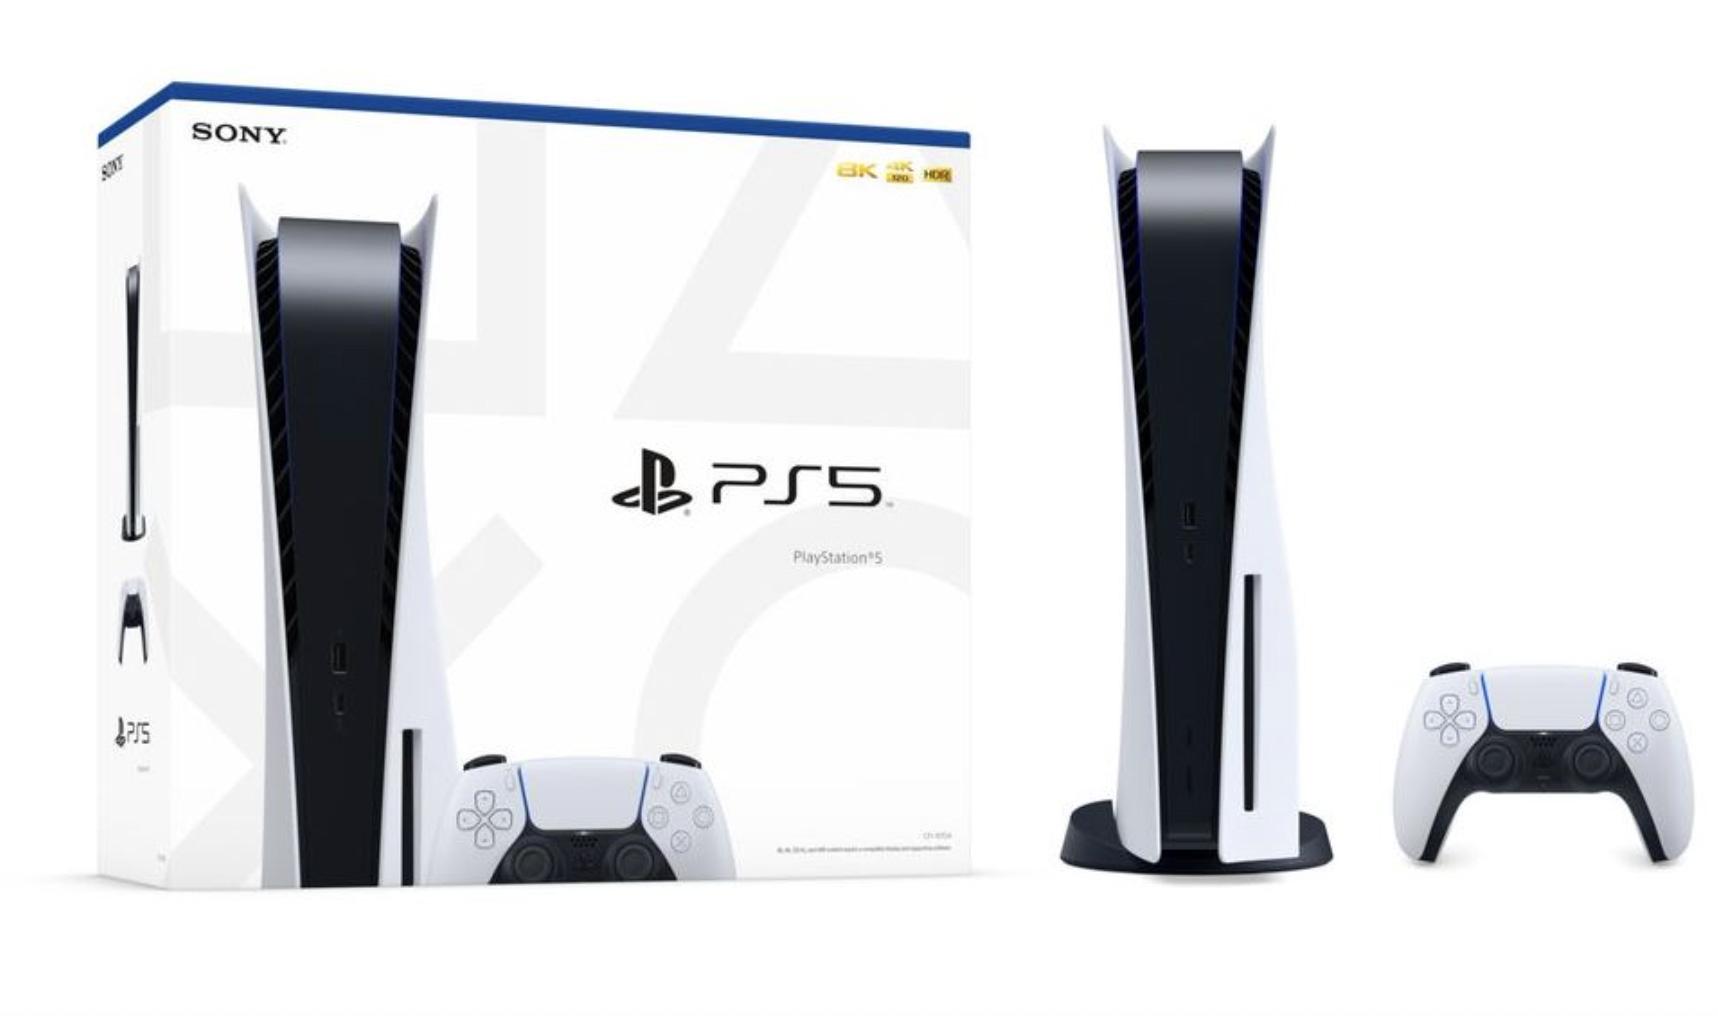 PlayStation 5 console and its retail box.